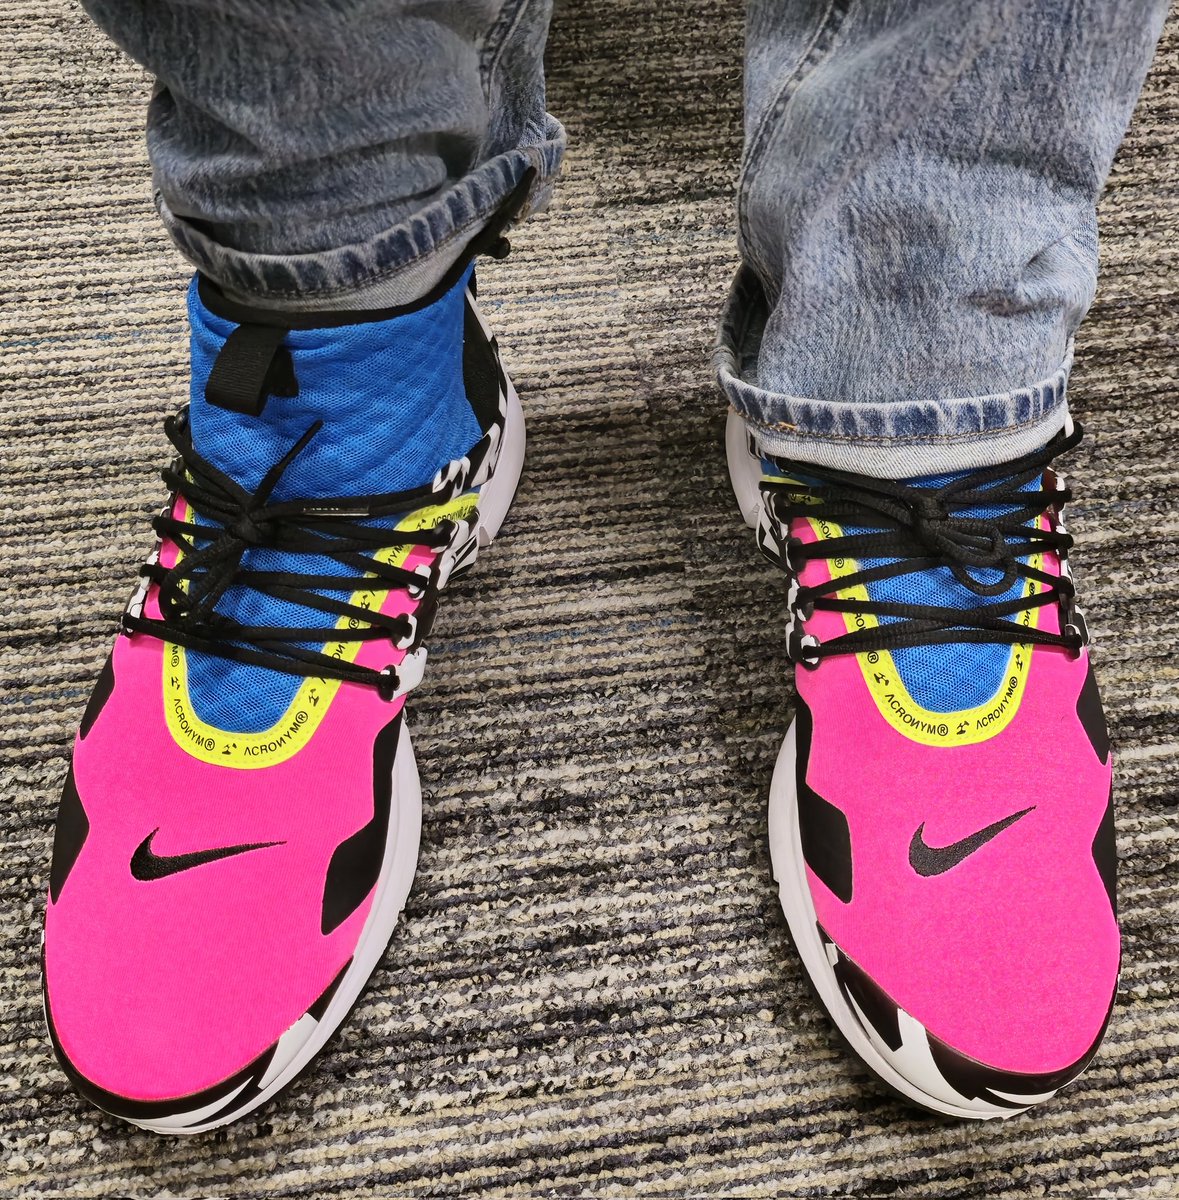 Start of a new week. Pulled out the the Acronym Air Presto Mid Utility 'Racer Pink'.  To me, one of the better color ways. #Nike #presto #SNKRS #sneakerhead #KOTD #yoursneakersaredope #wearyoursneakers